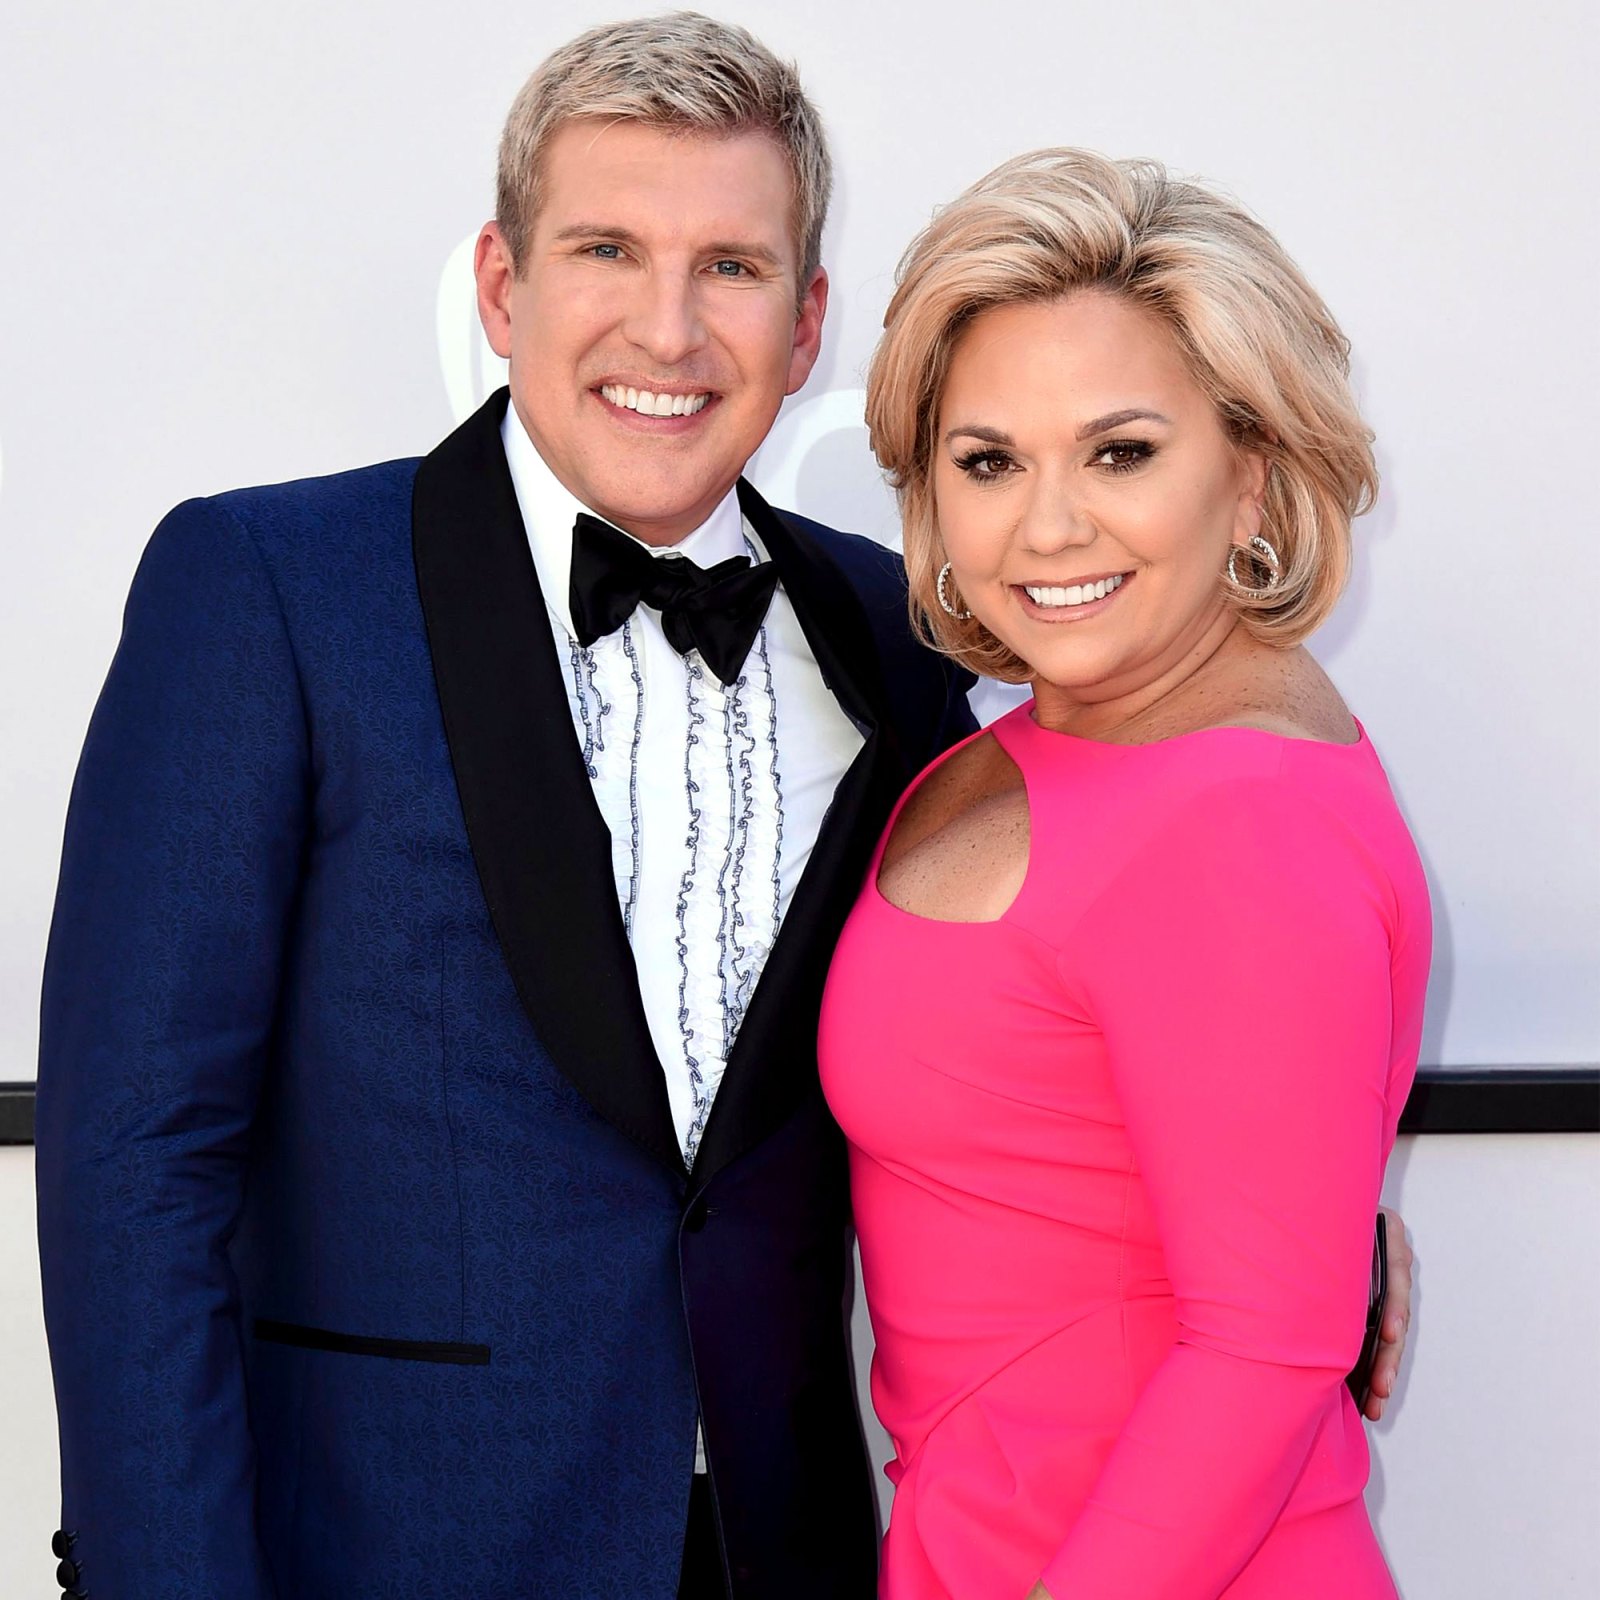 Home Detention to Spending Limits: Todd, Julie Chrisley’s Fraud Trial Rules